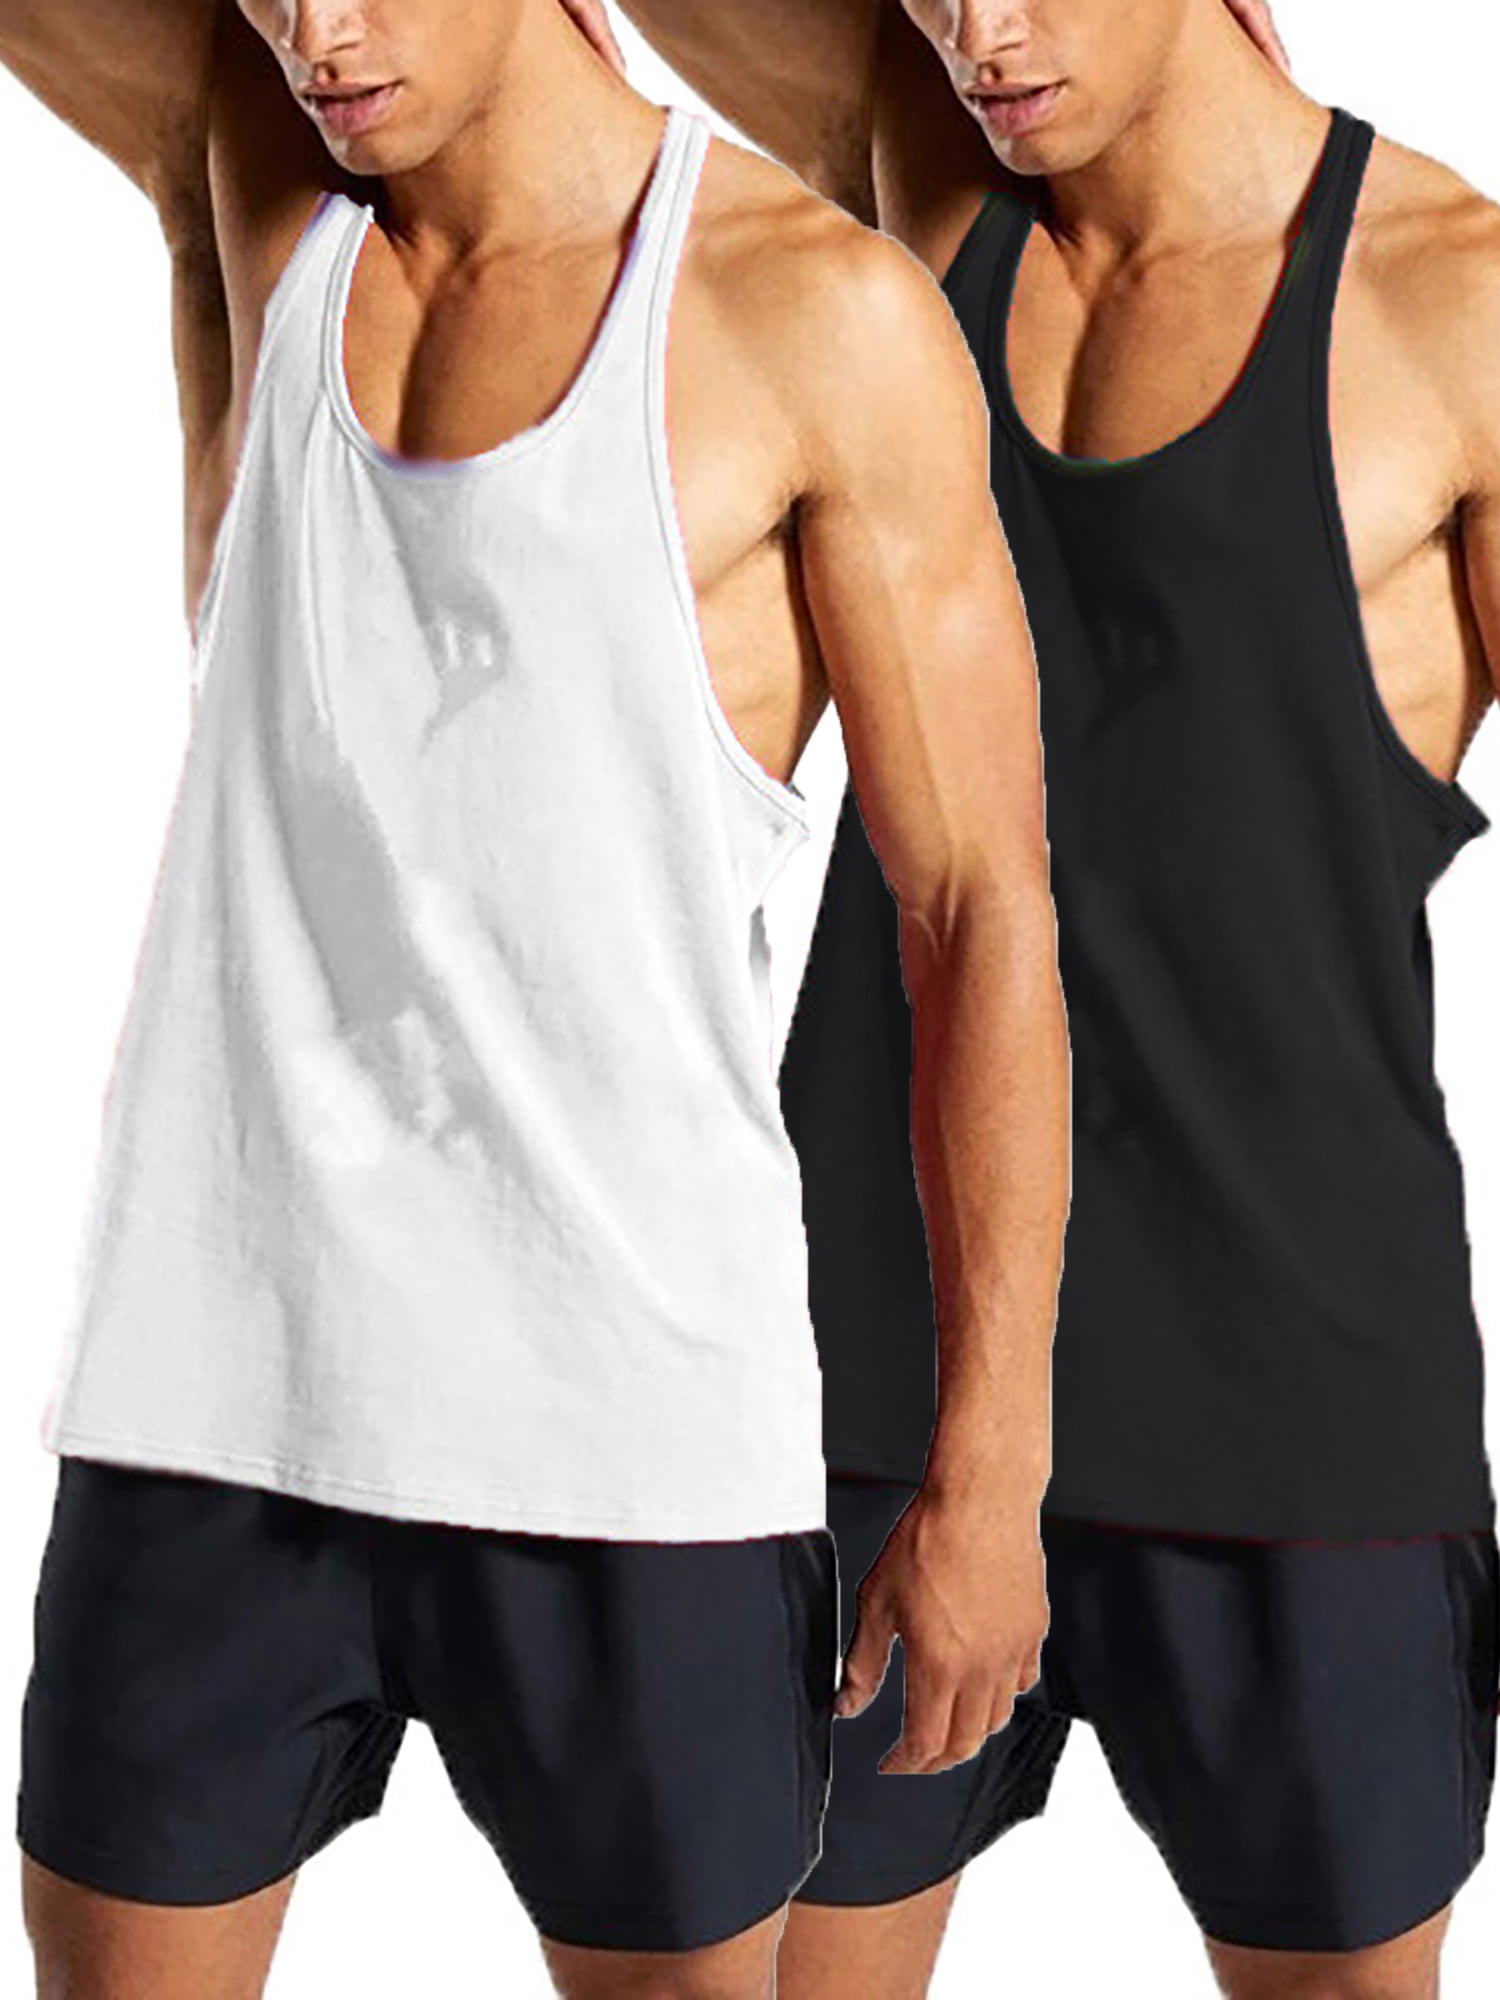 Men's Compression Vest Athletic Fitness Gym Tank Top Dri fit Stretchy Wicking 